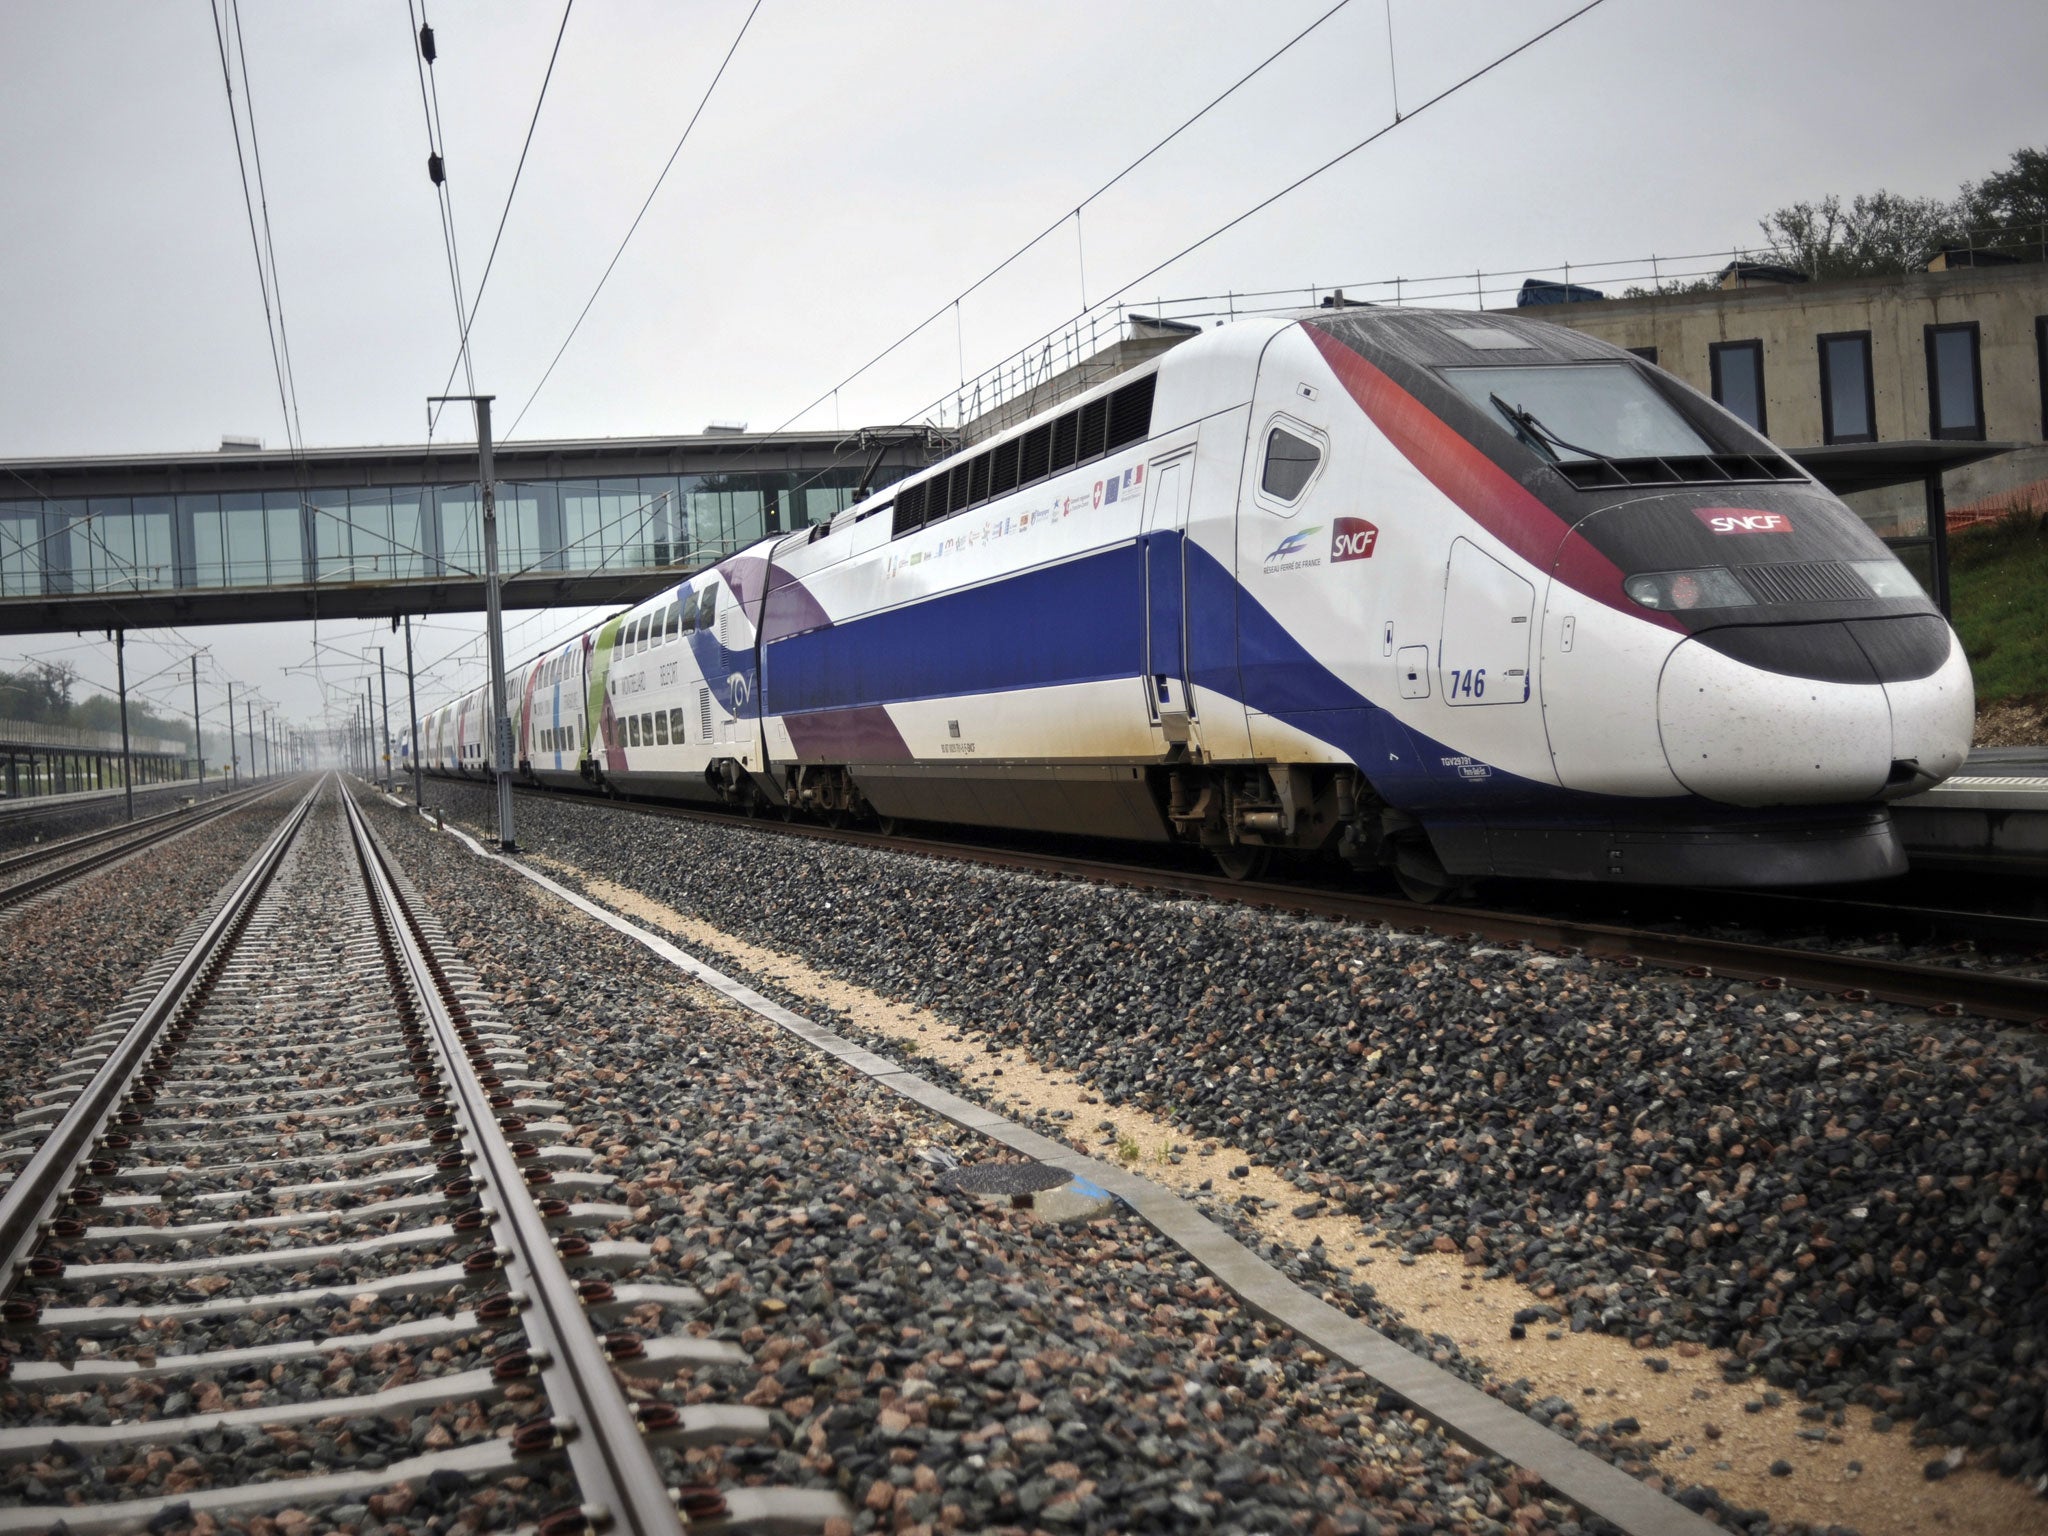 The Rail Europe name is to be erased by Christmas – just as horizons for British train travellers are being expanded with a new Paris-Barcelona high-speed service